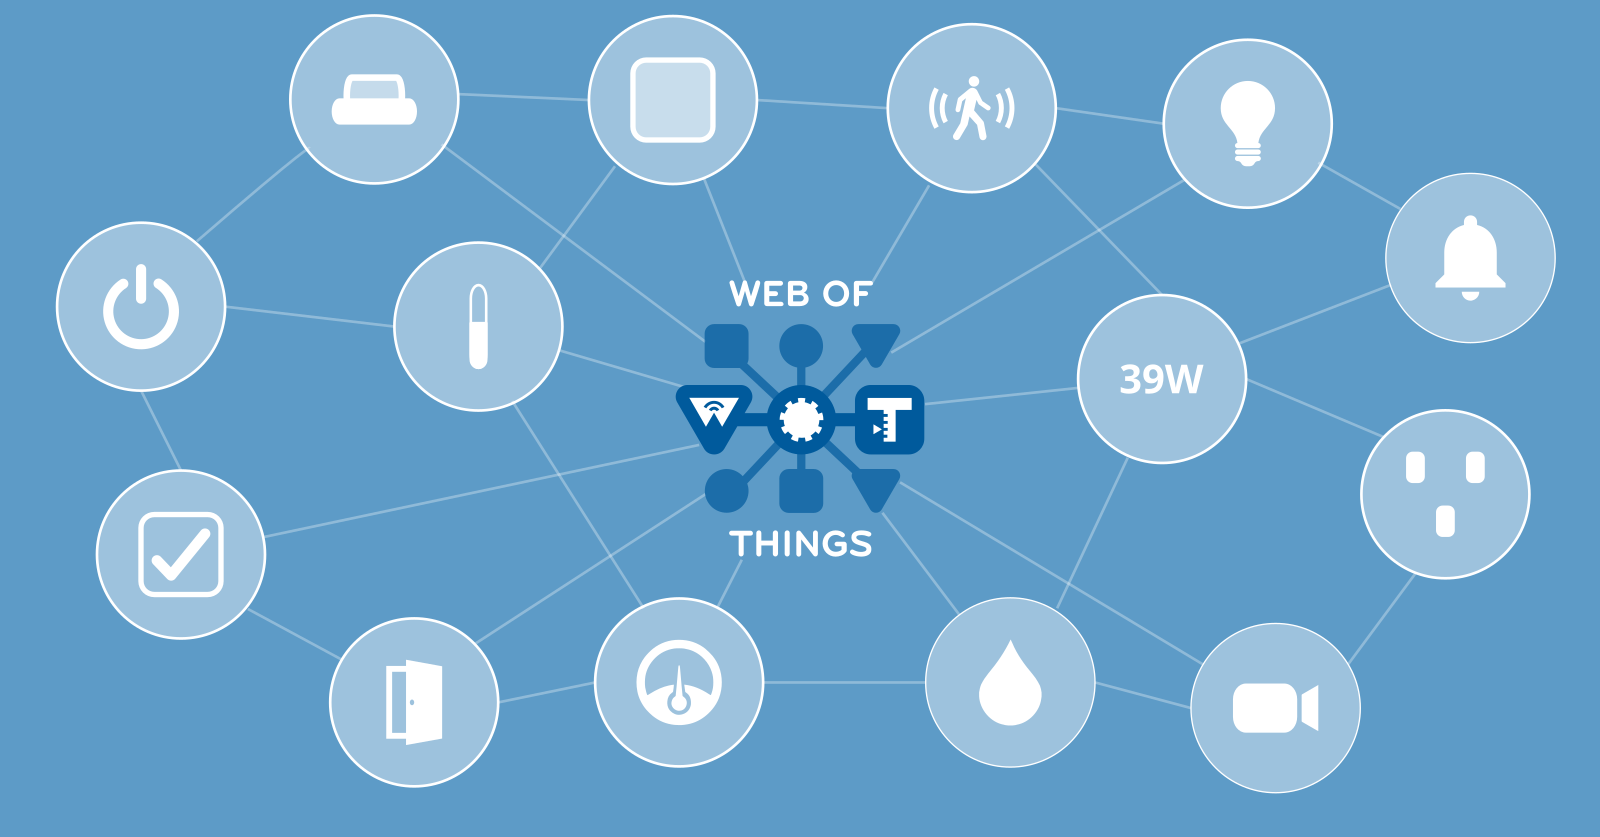 An illustration of a web of connected devices with the Web of Things logo at the centre